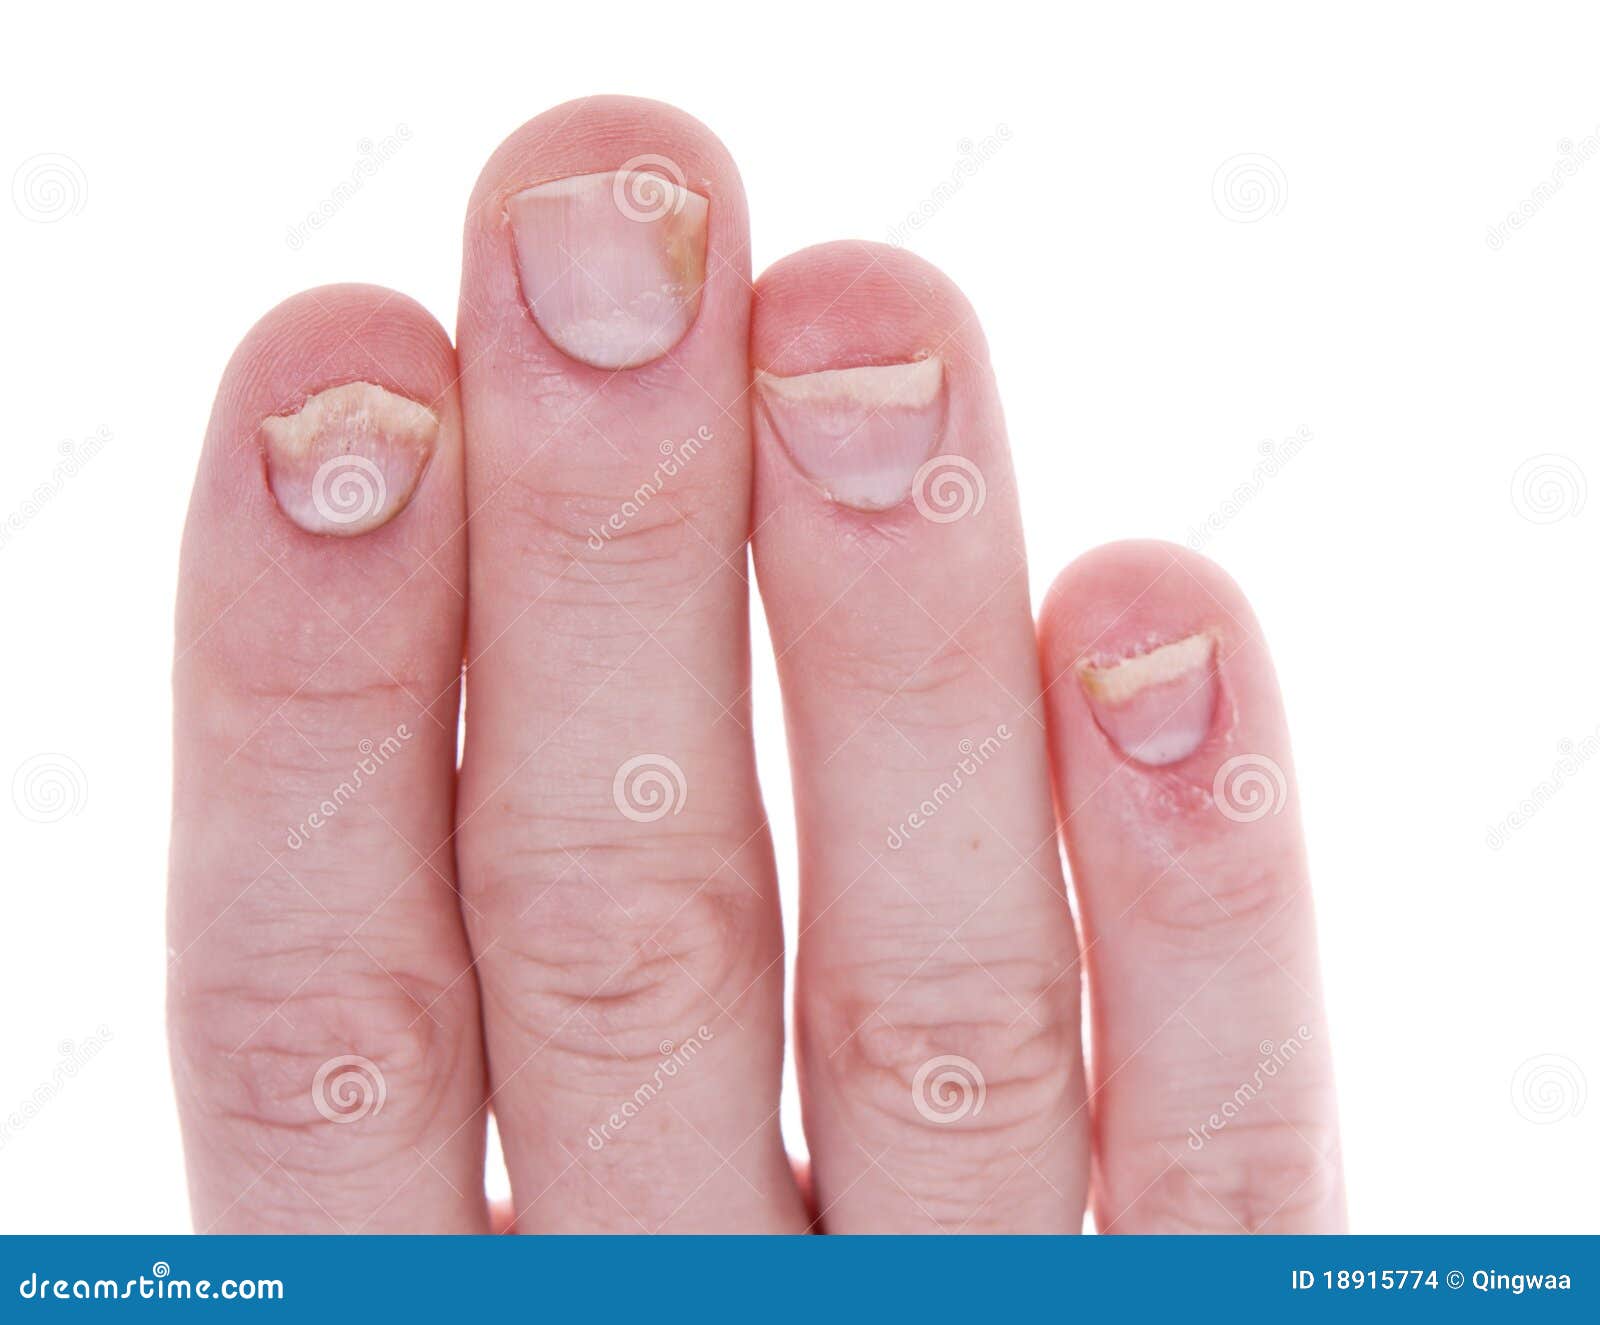 CosmeStyles Sensation - Common Nail Problems? How to get rid all of them?  Find how! :) Nail problems affect people of all ages. Diet is generally not  responsible for abnormal nail changes,